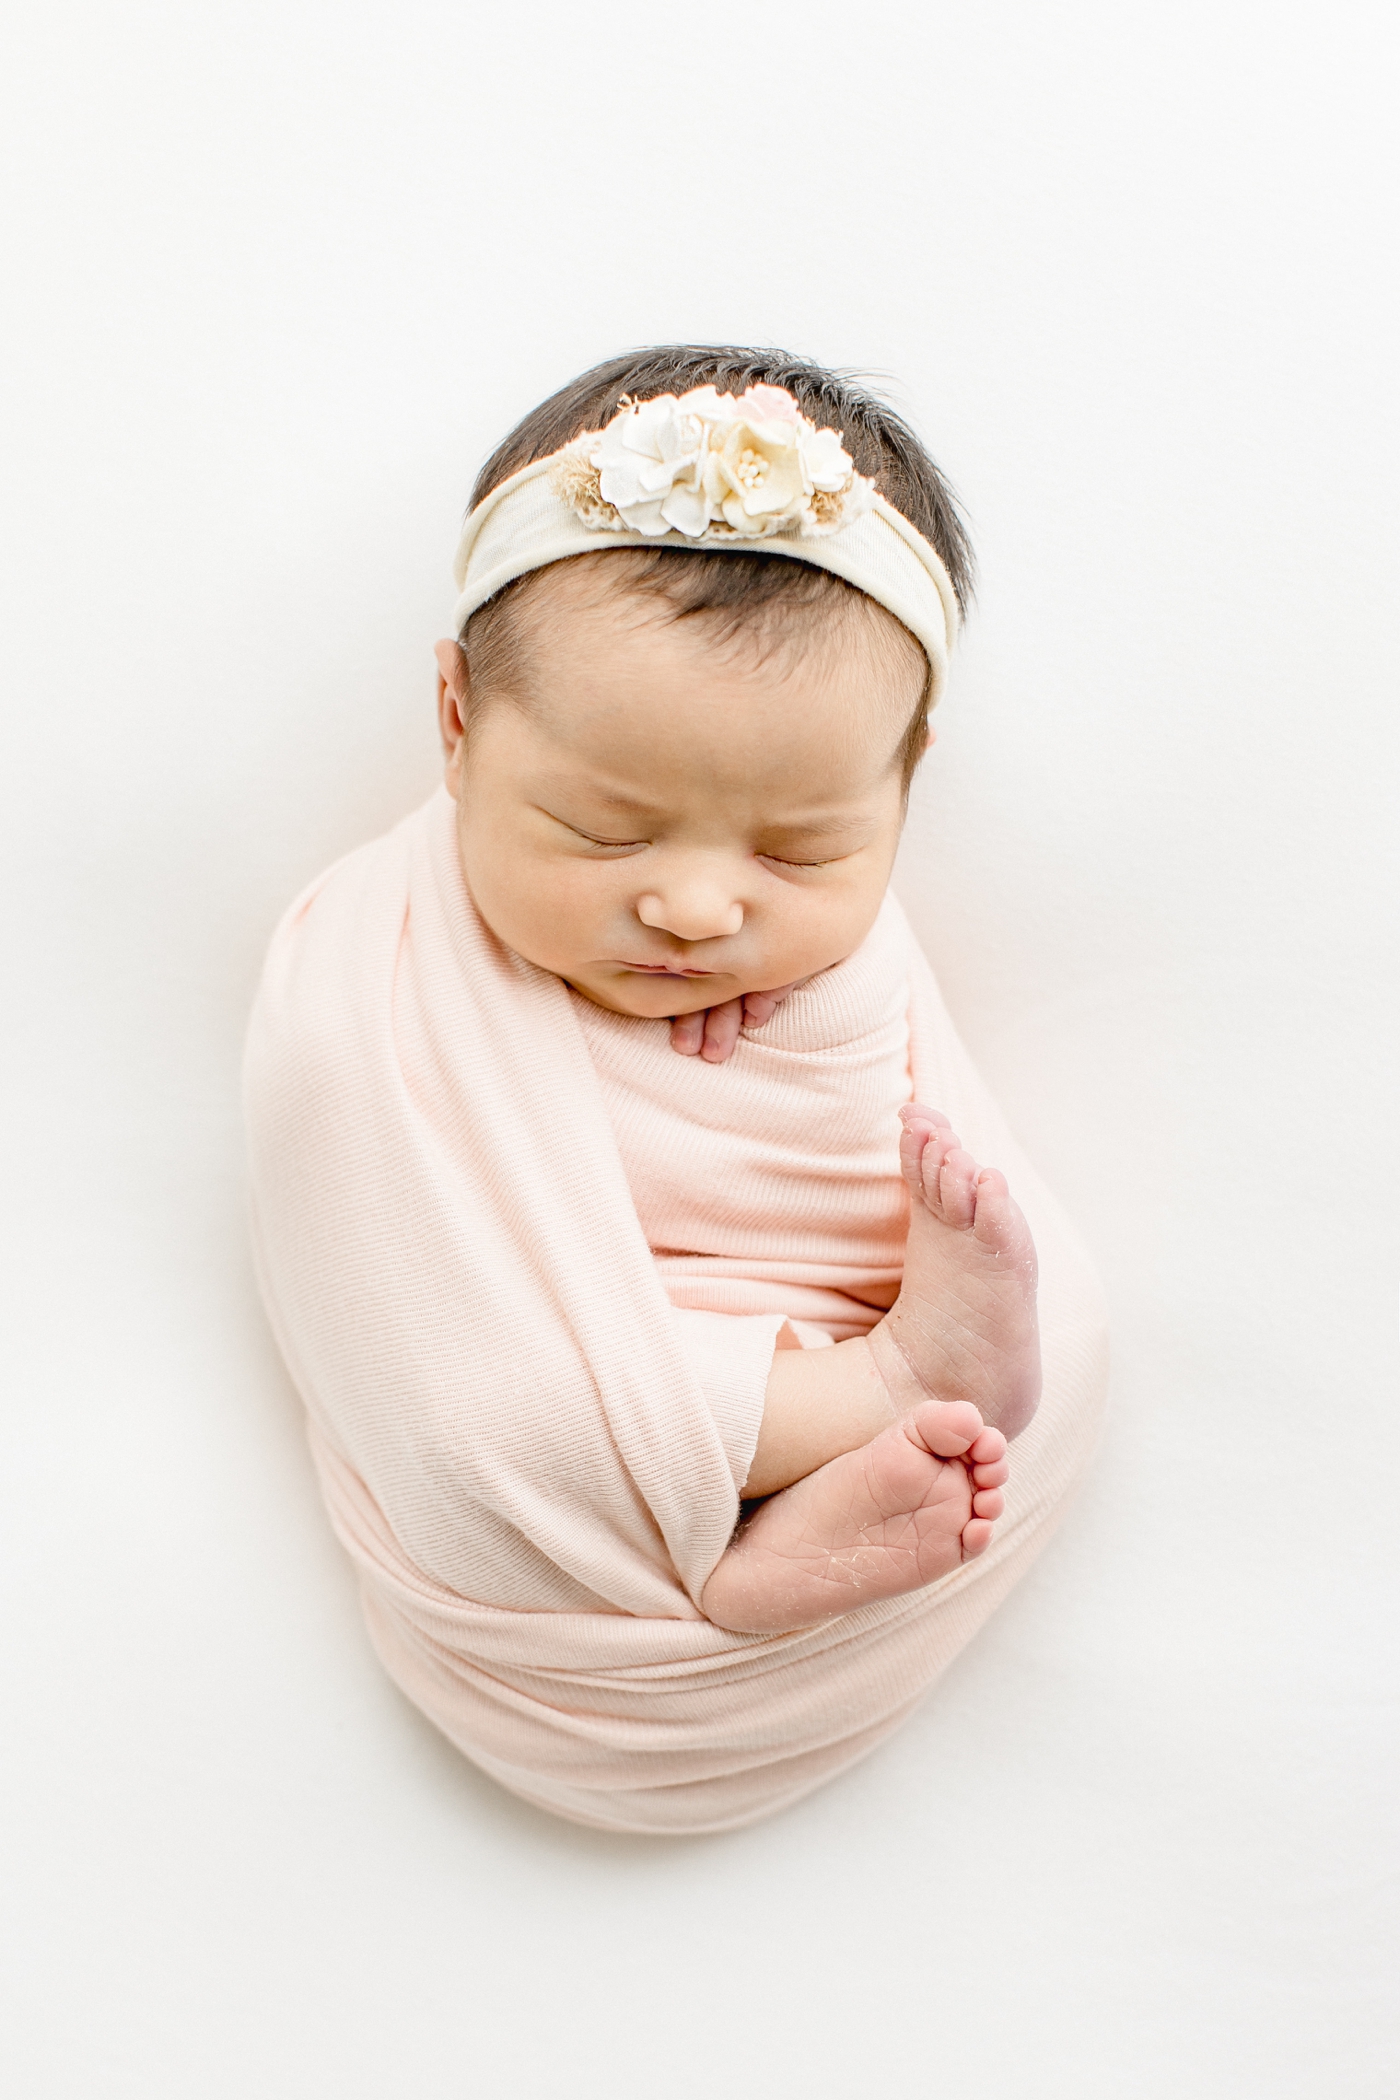 Baby girl in light pink swaddle with floral headband. Photo by Cedar Park newborn photographer, Sana Ahmed Photography.